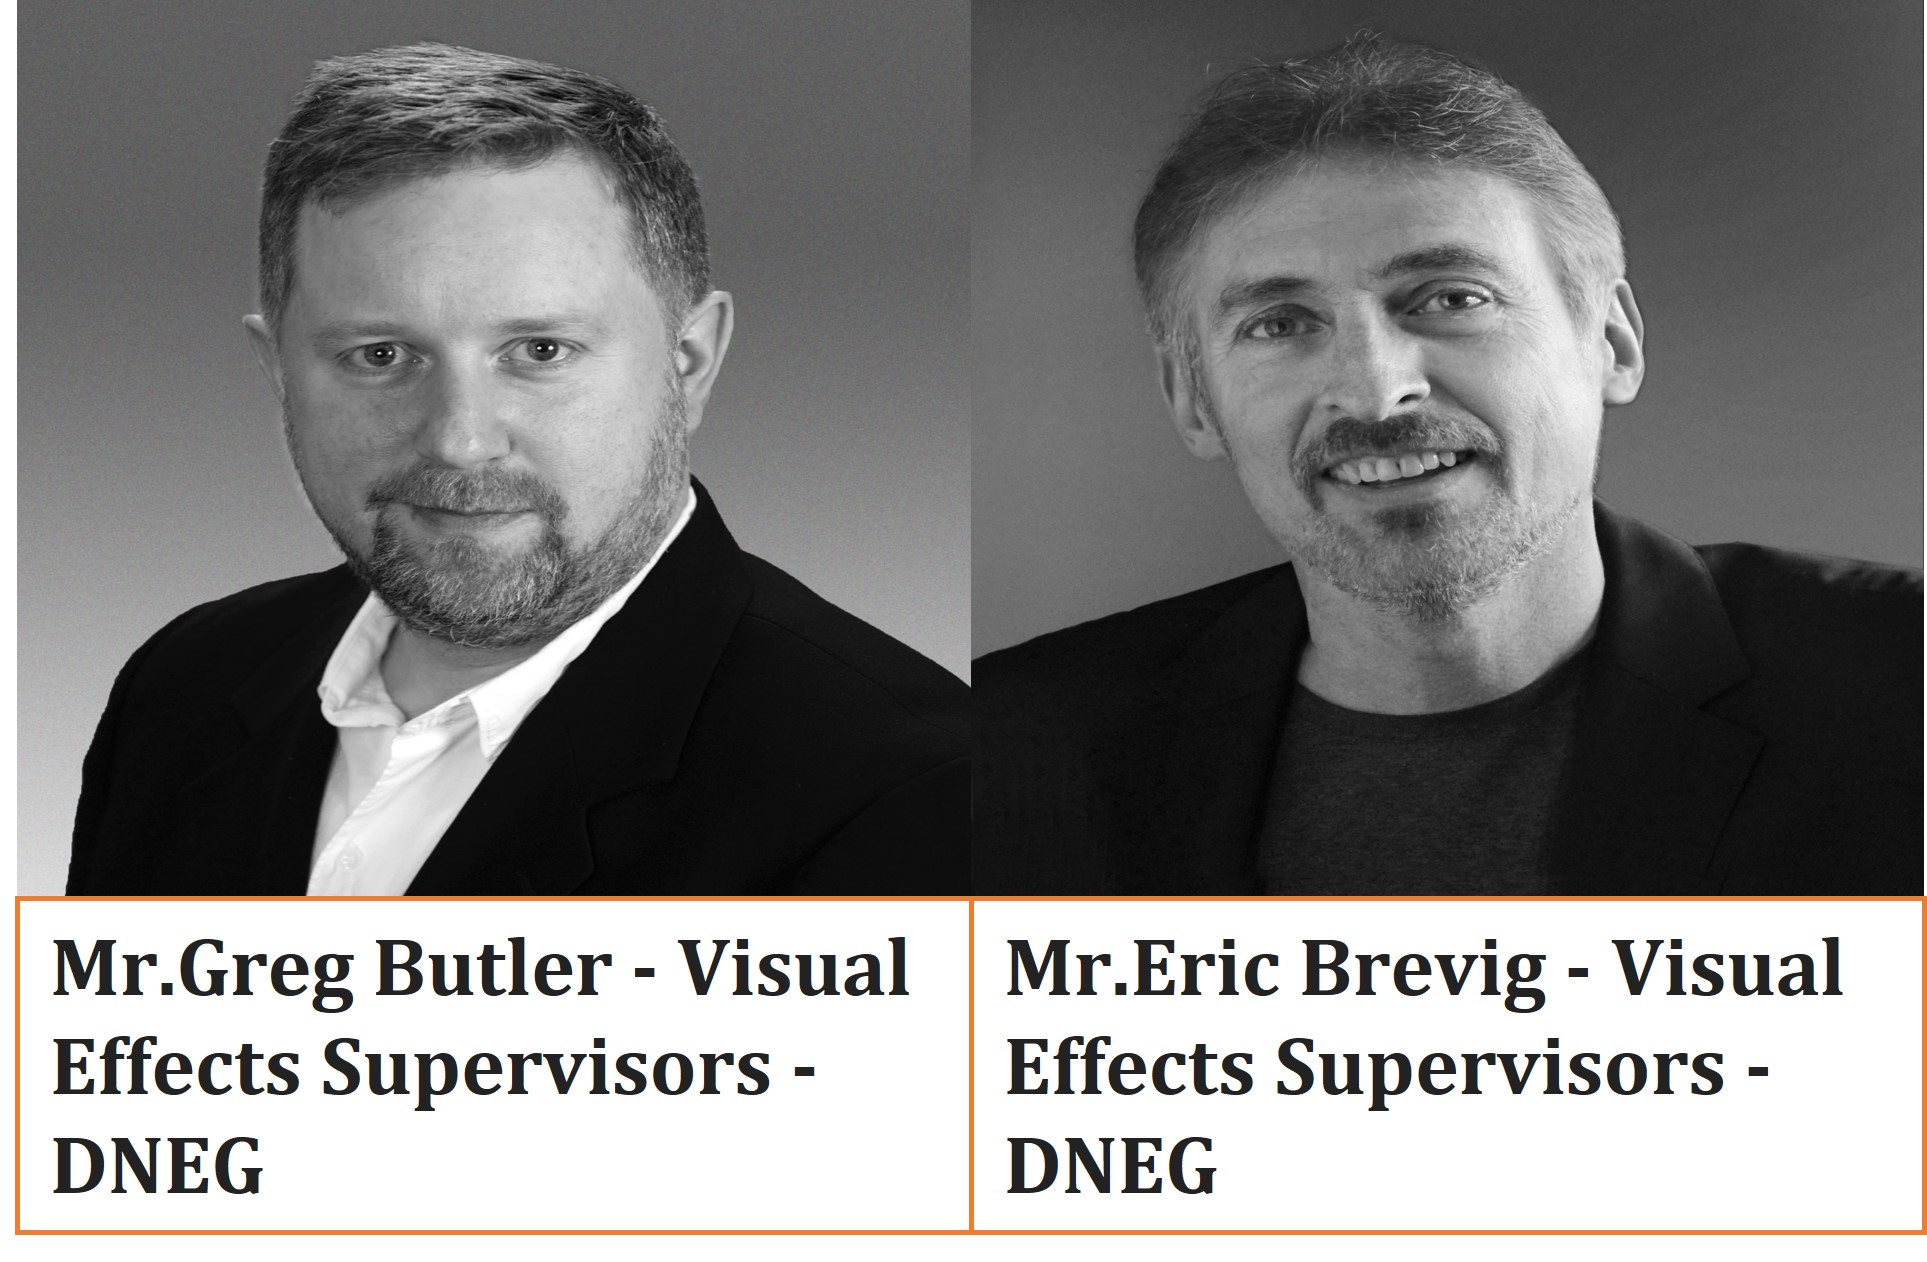 Eric Brevig and Greg Butler as Visual Effects Supervisors